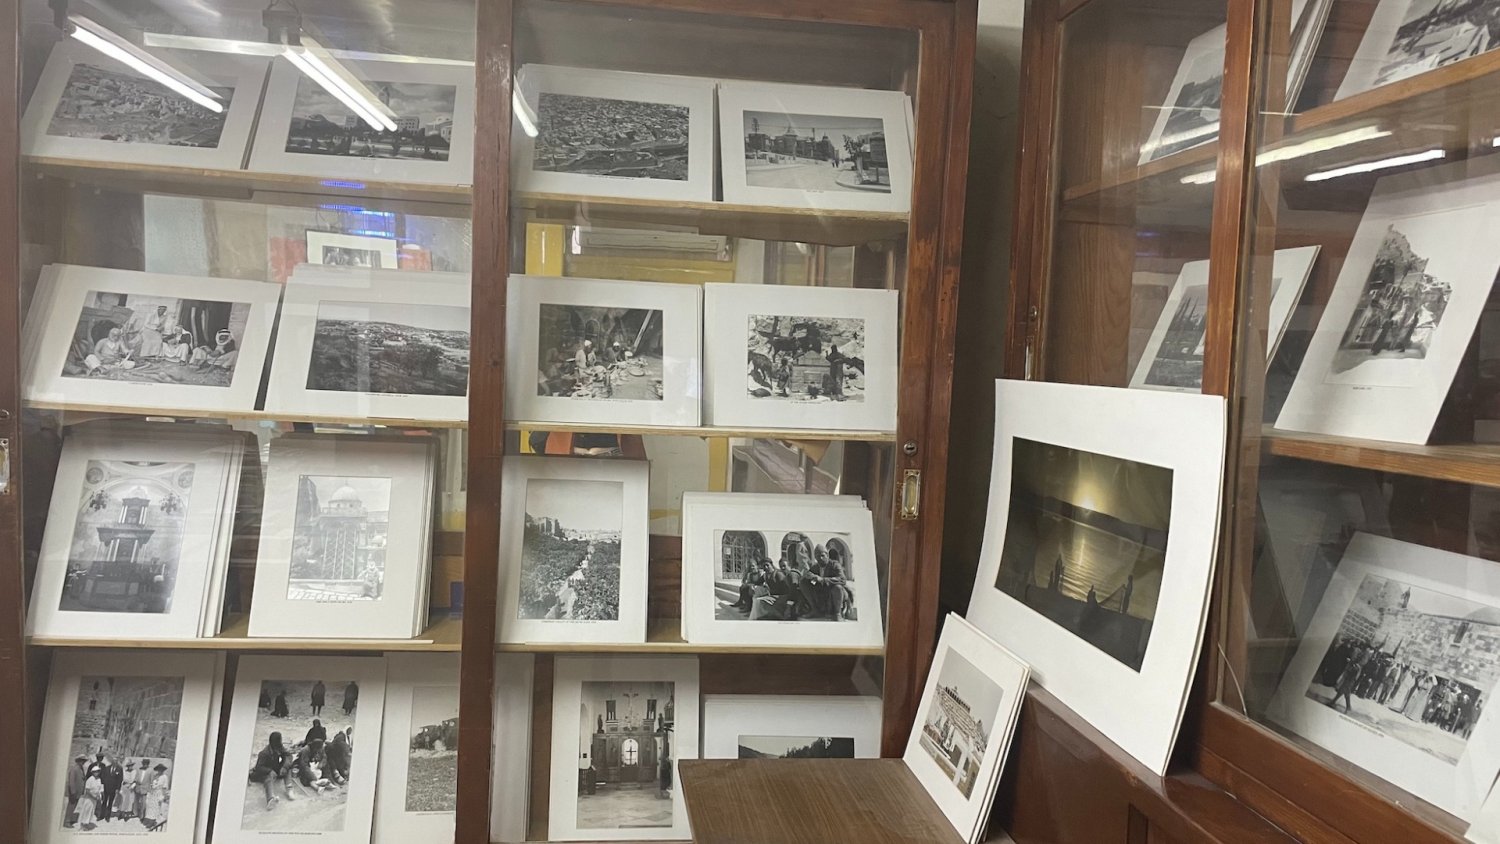 Elia Kahvedjian displays his grandfather's black and white old photos in his shop